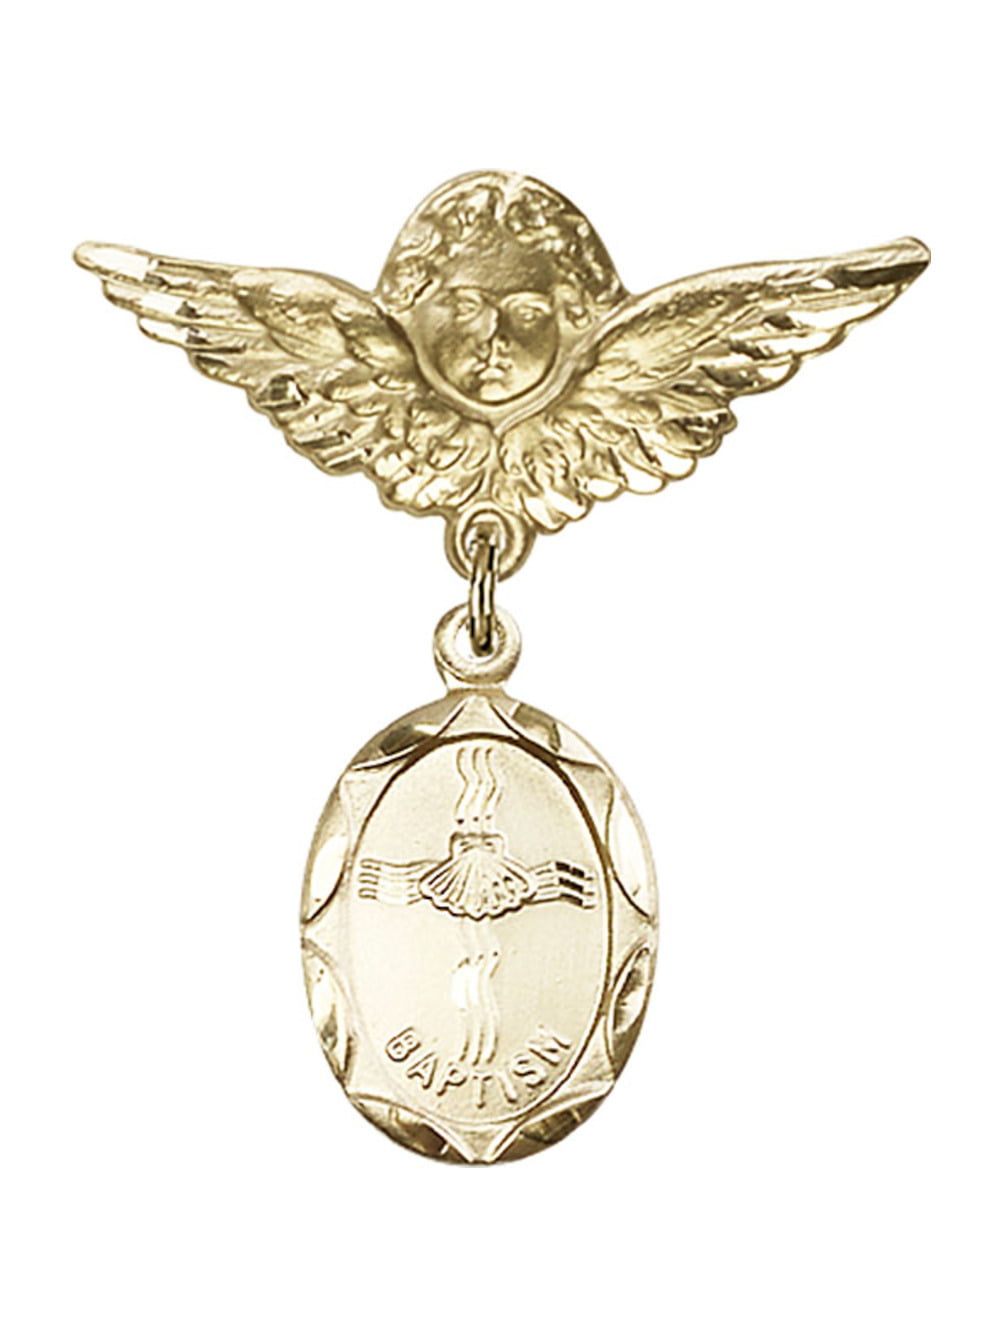 Gold Filled Baby Badge with Baptism Charm and Angel/Wings Pin